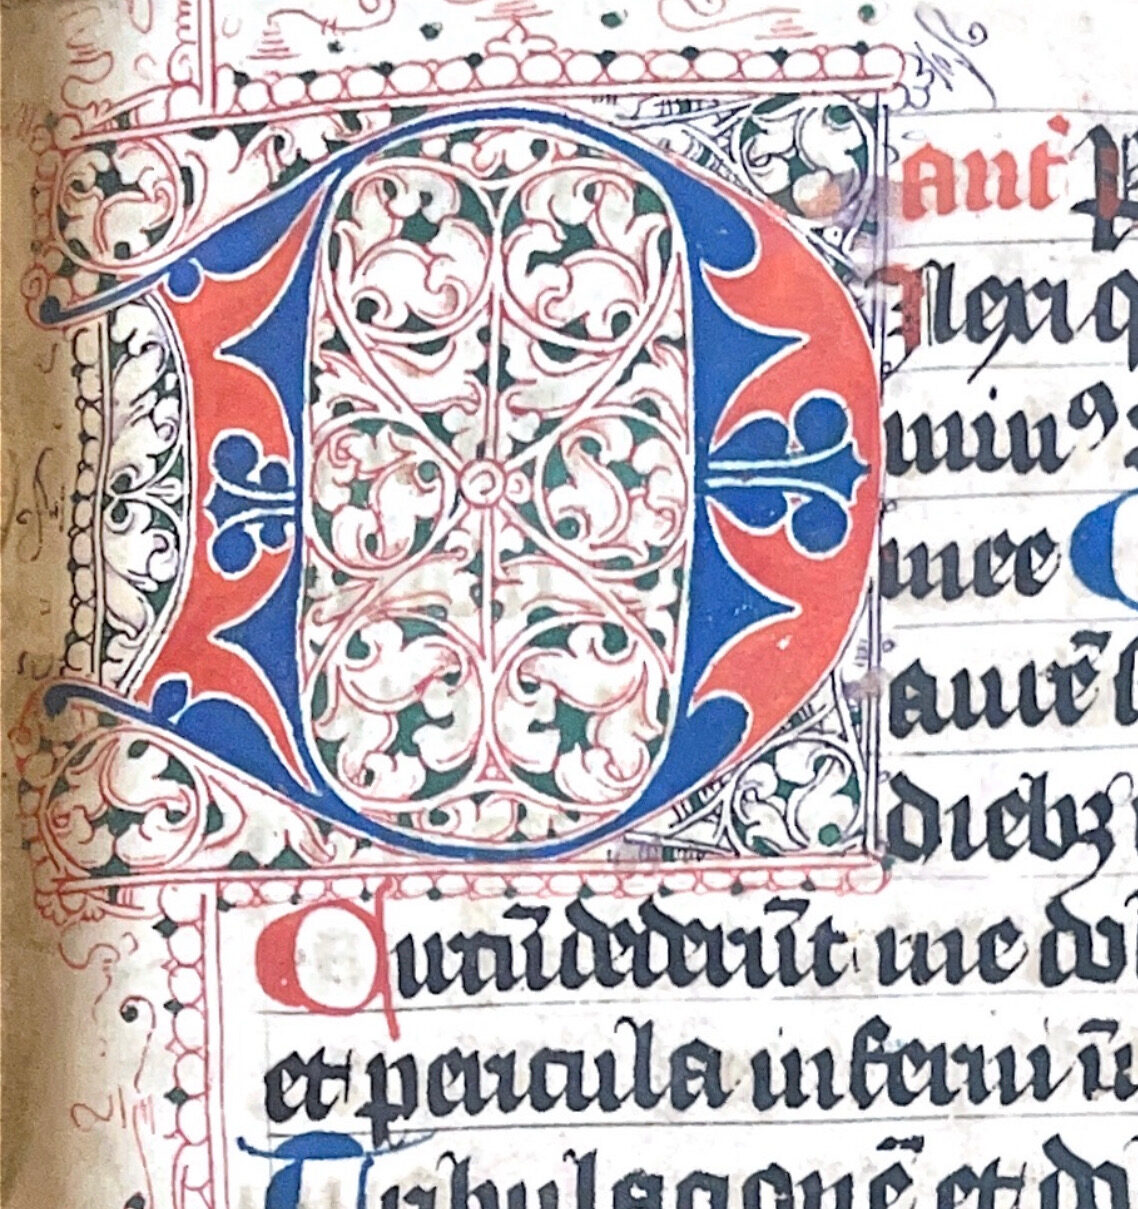 Illuminated initial of letter D in red and blue ink from Cologne Office of the Dead, 